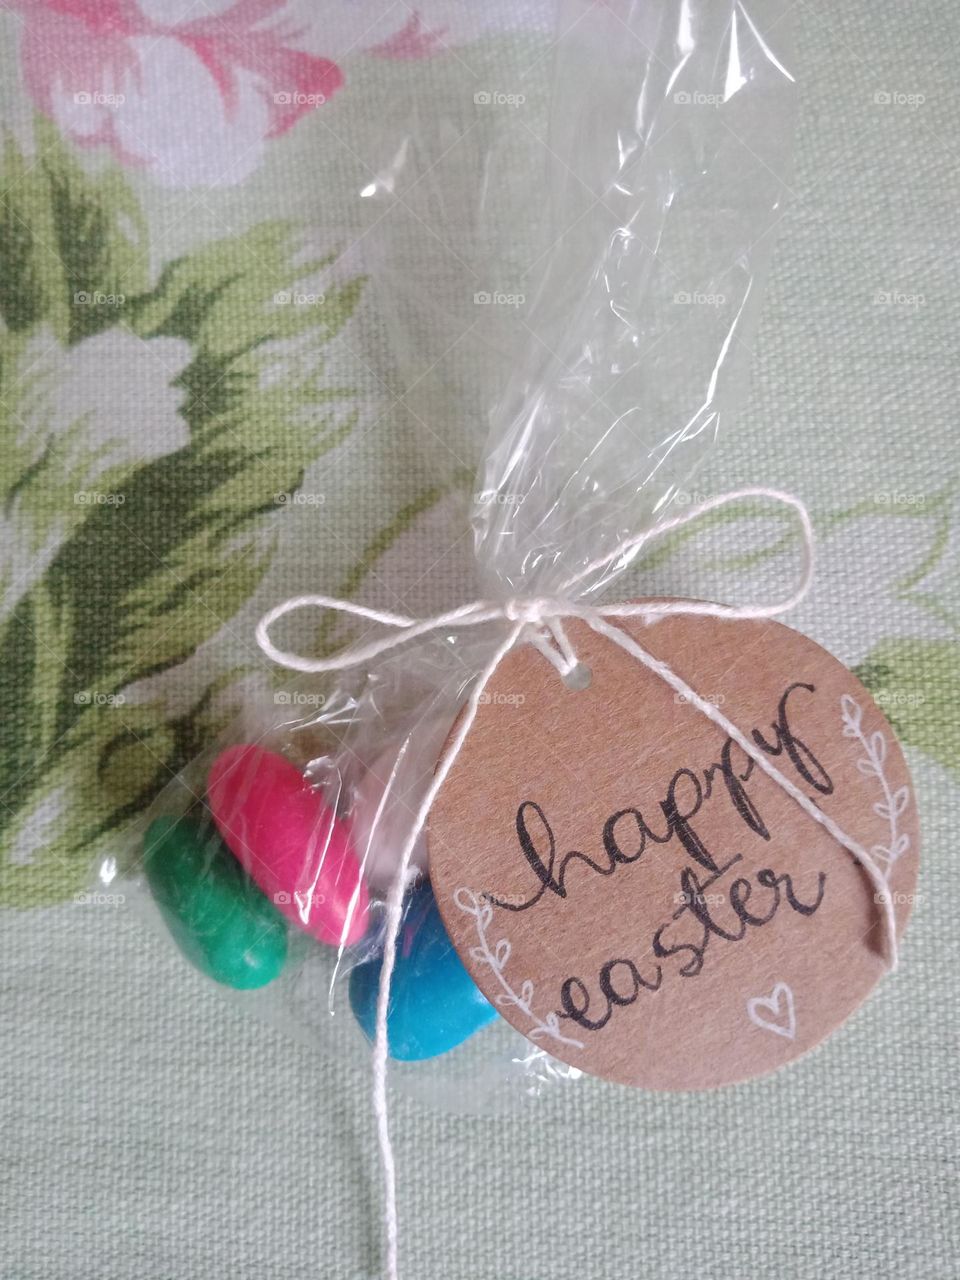 Easter almonds in a package with a handmade tag